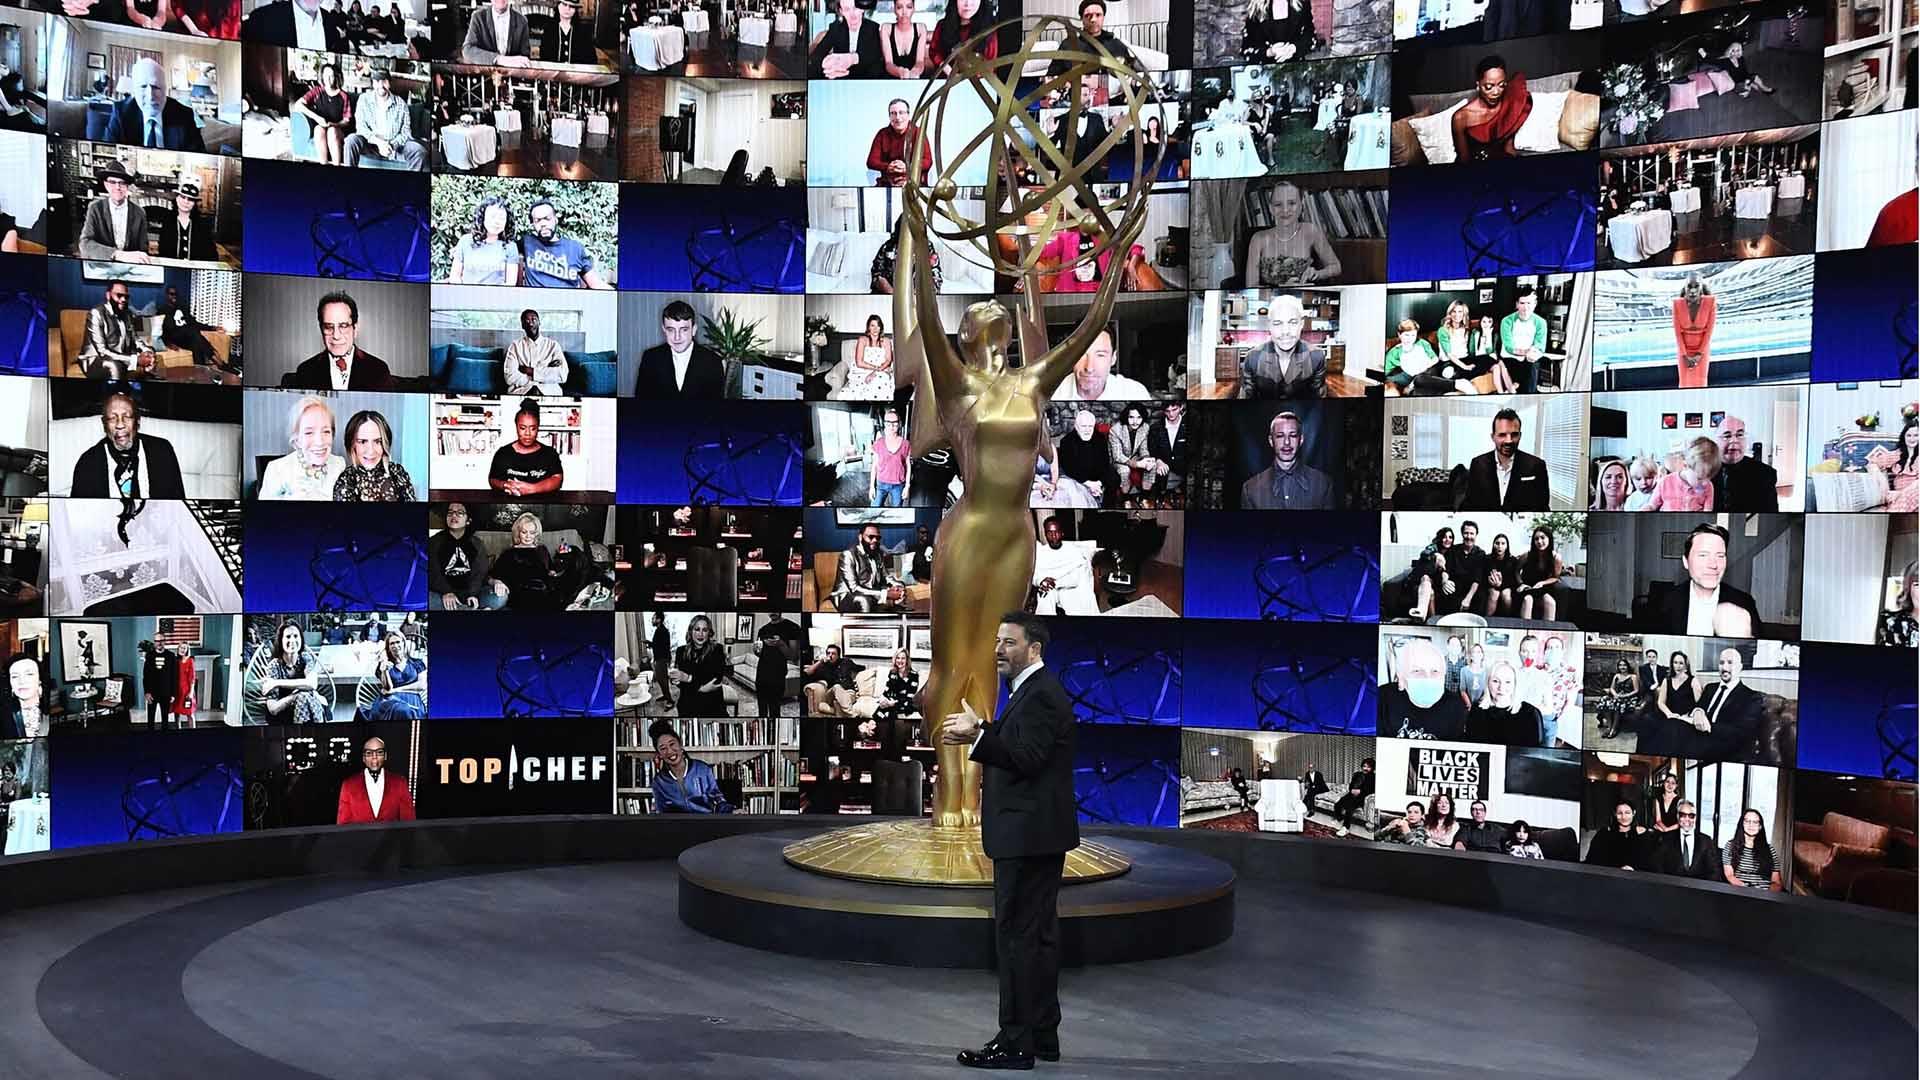 Emmy Awards 2020: The Biggest Snubs And The Most Surprising Wins